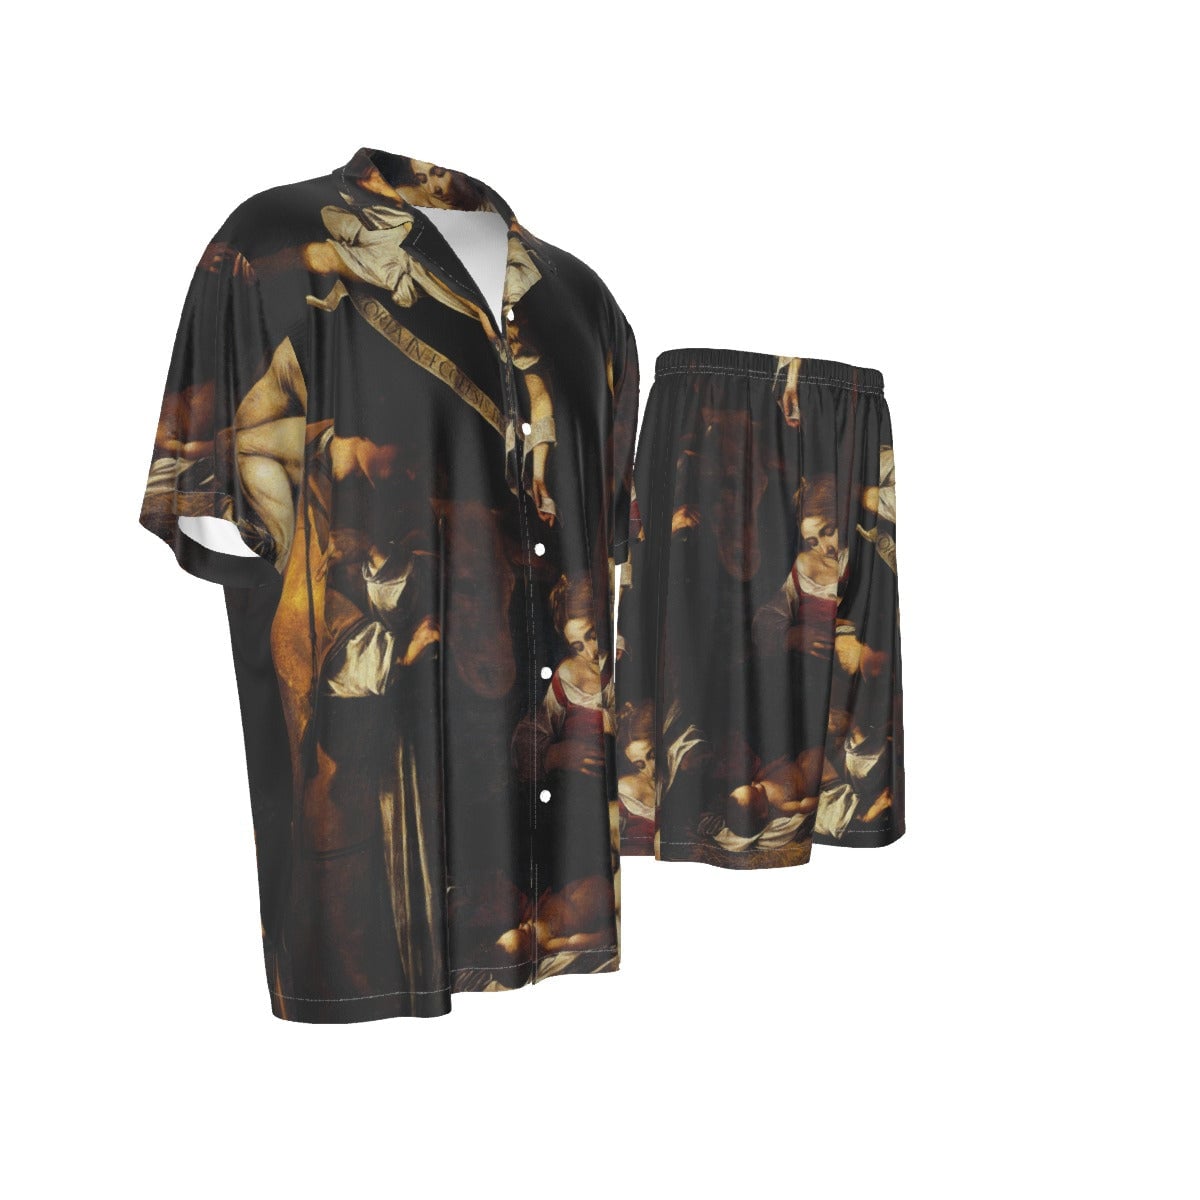 Nativity with St Francis and St Lawrence by Caravaggio Art Silk Shirt Suit Set